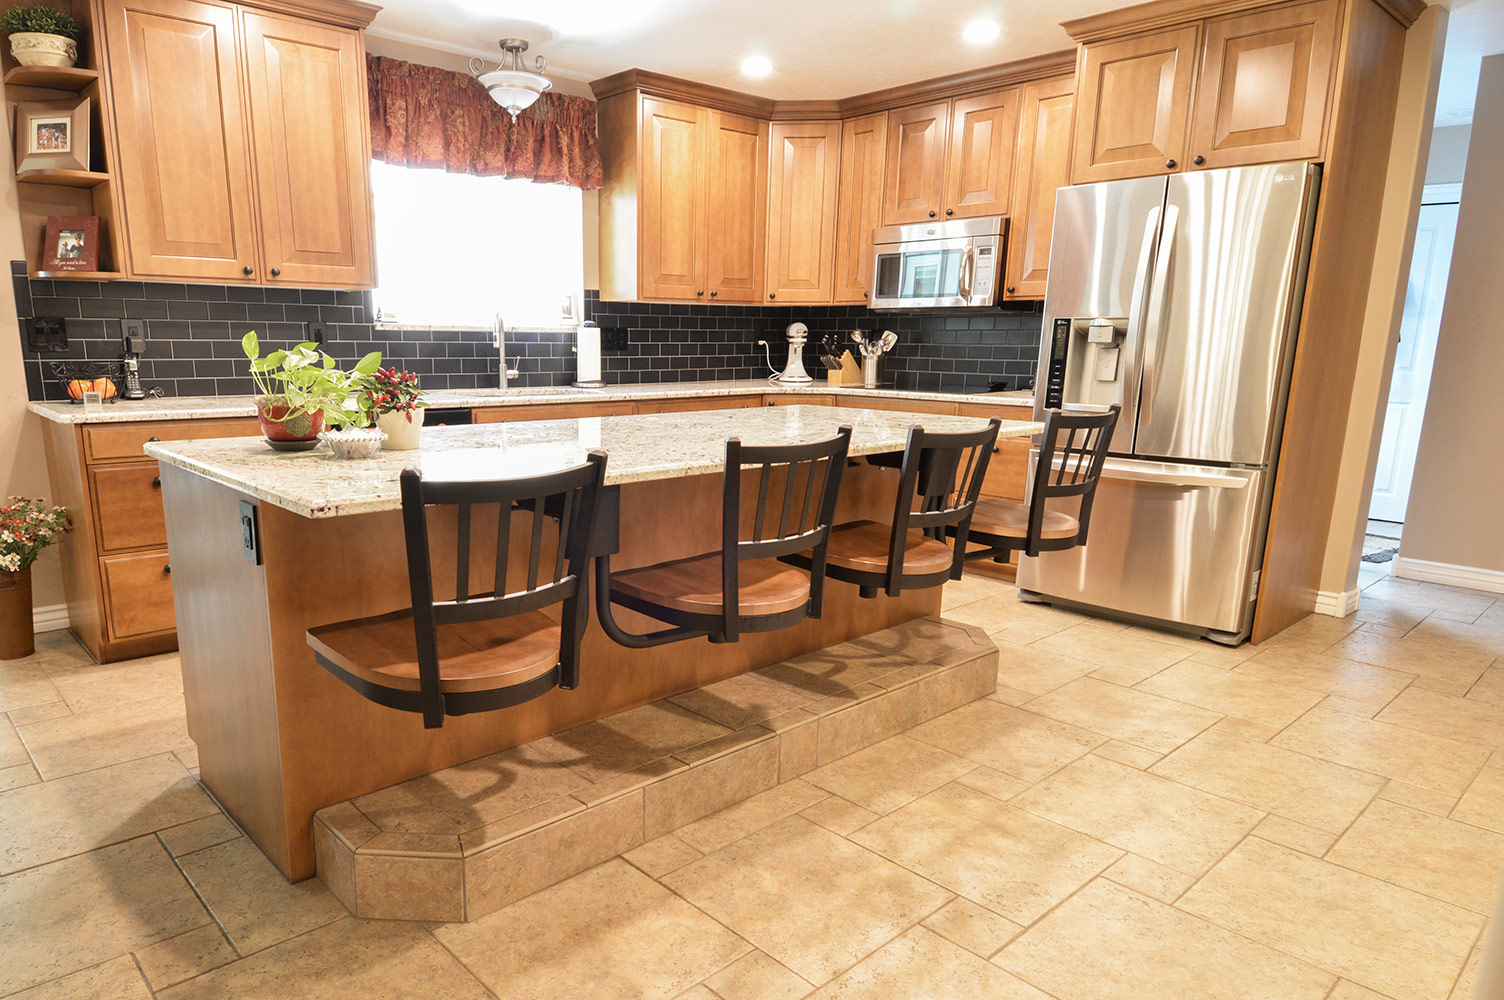 Photos | Kitchen Photos | Photo Gallery | Seating Innovations